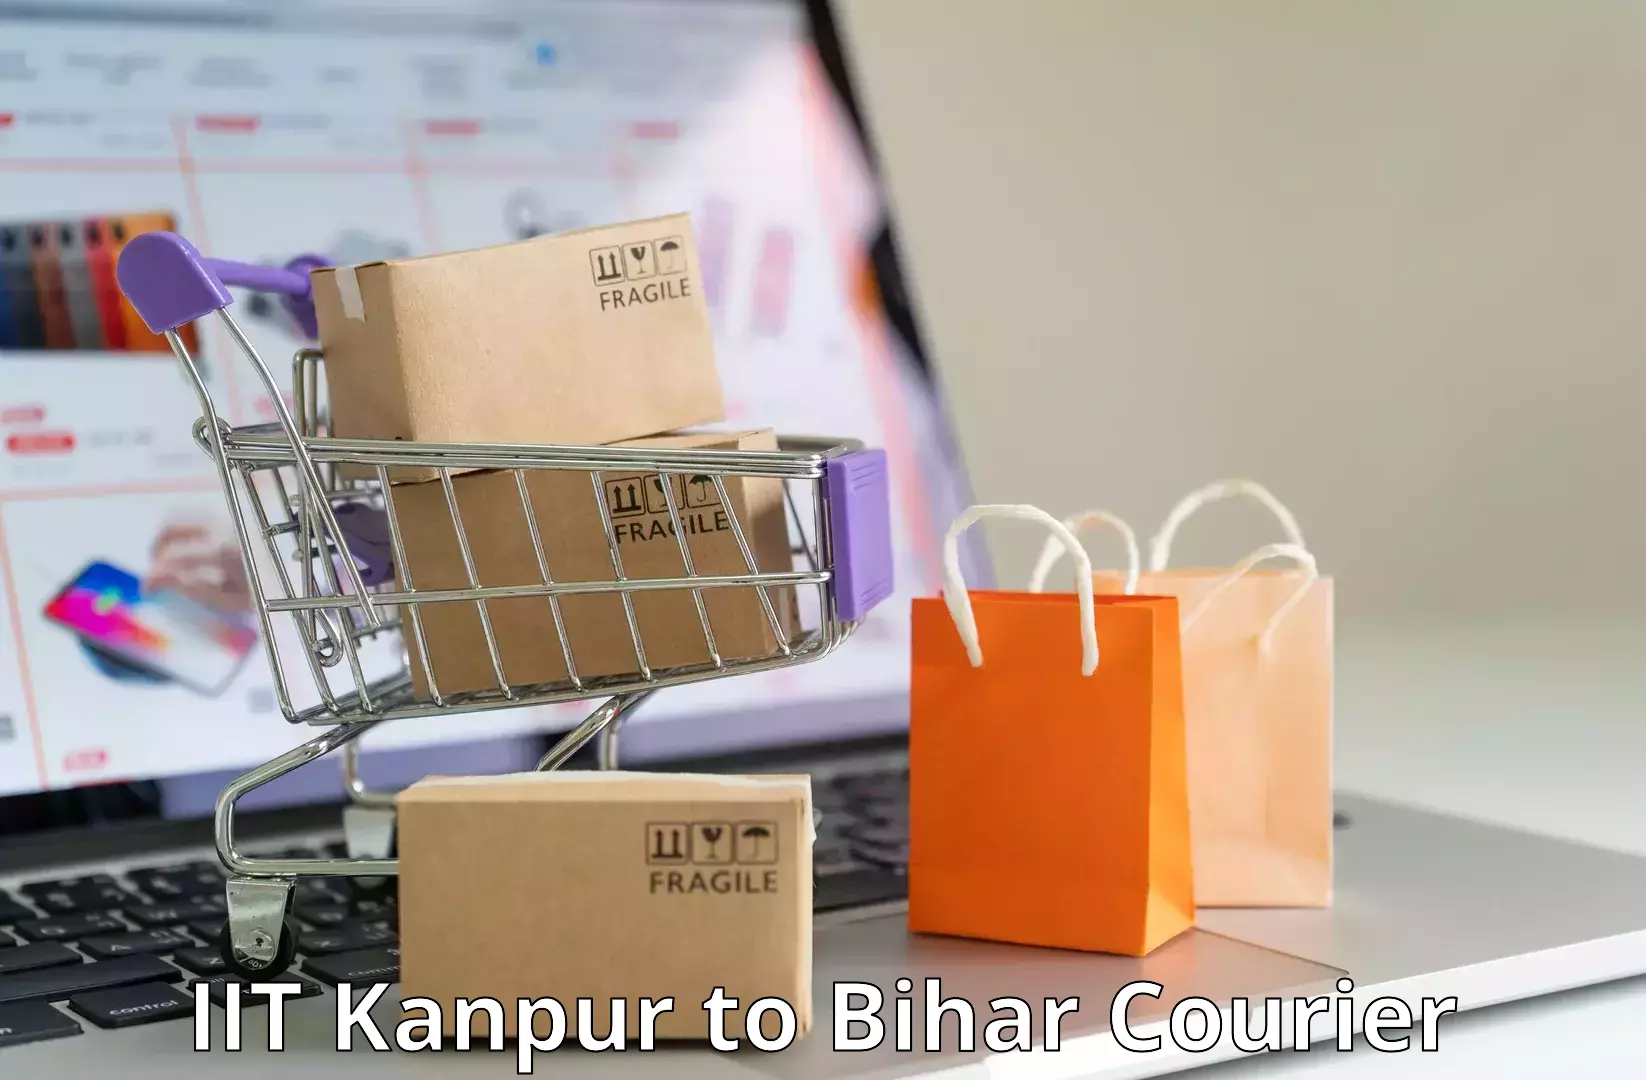 Next-generation courier services IIT Kanpur to Runni Saidpur